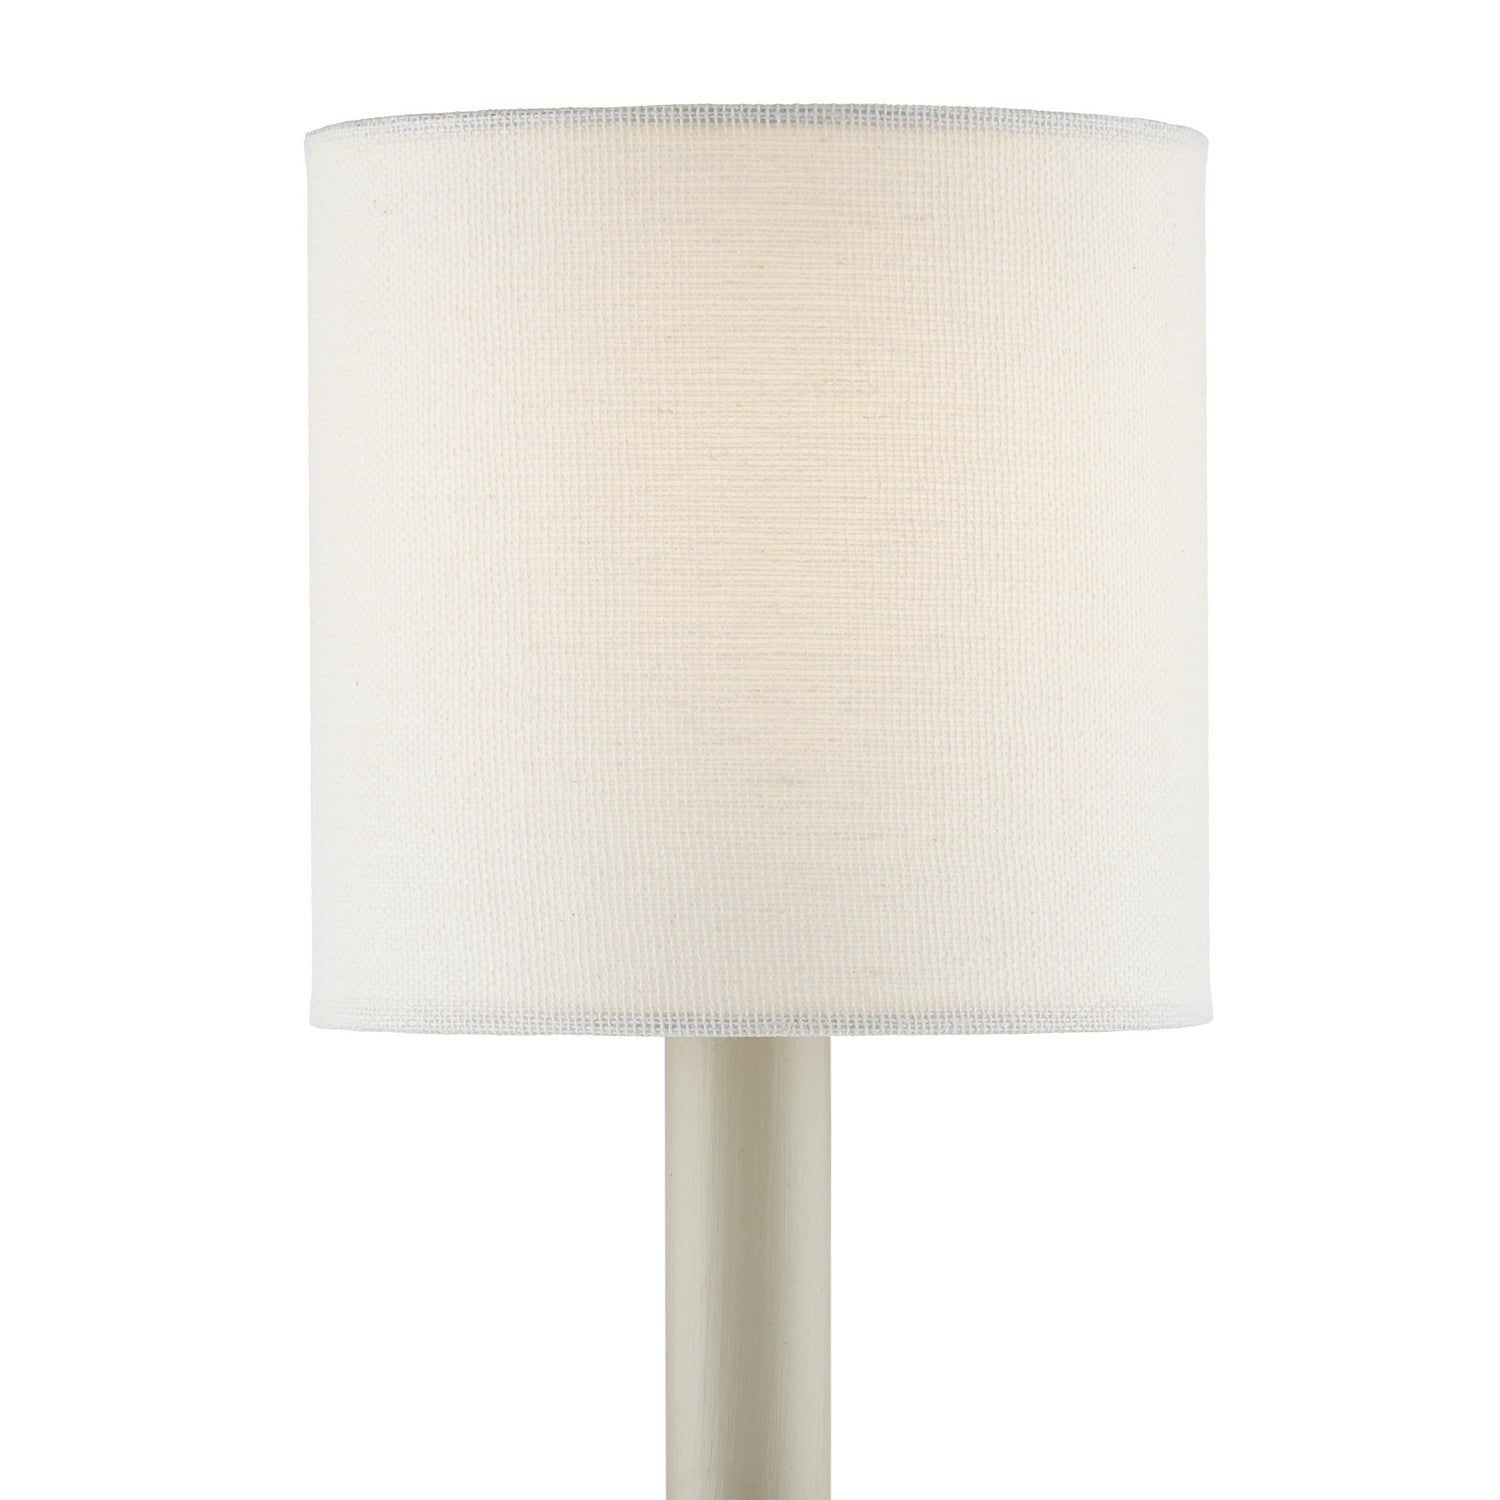 Chandelier Shade in Off-White finish